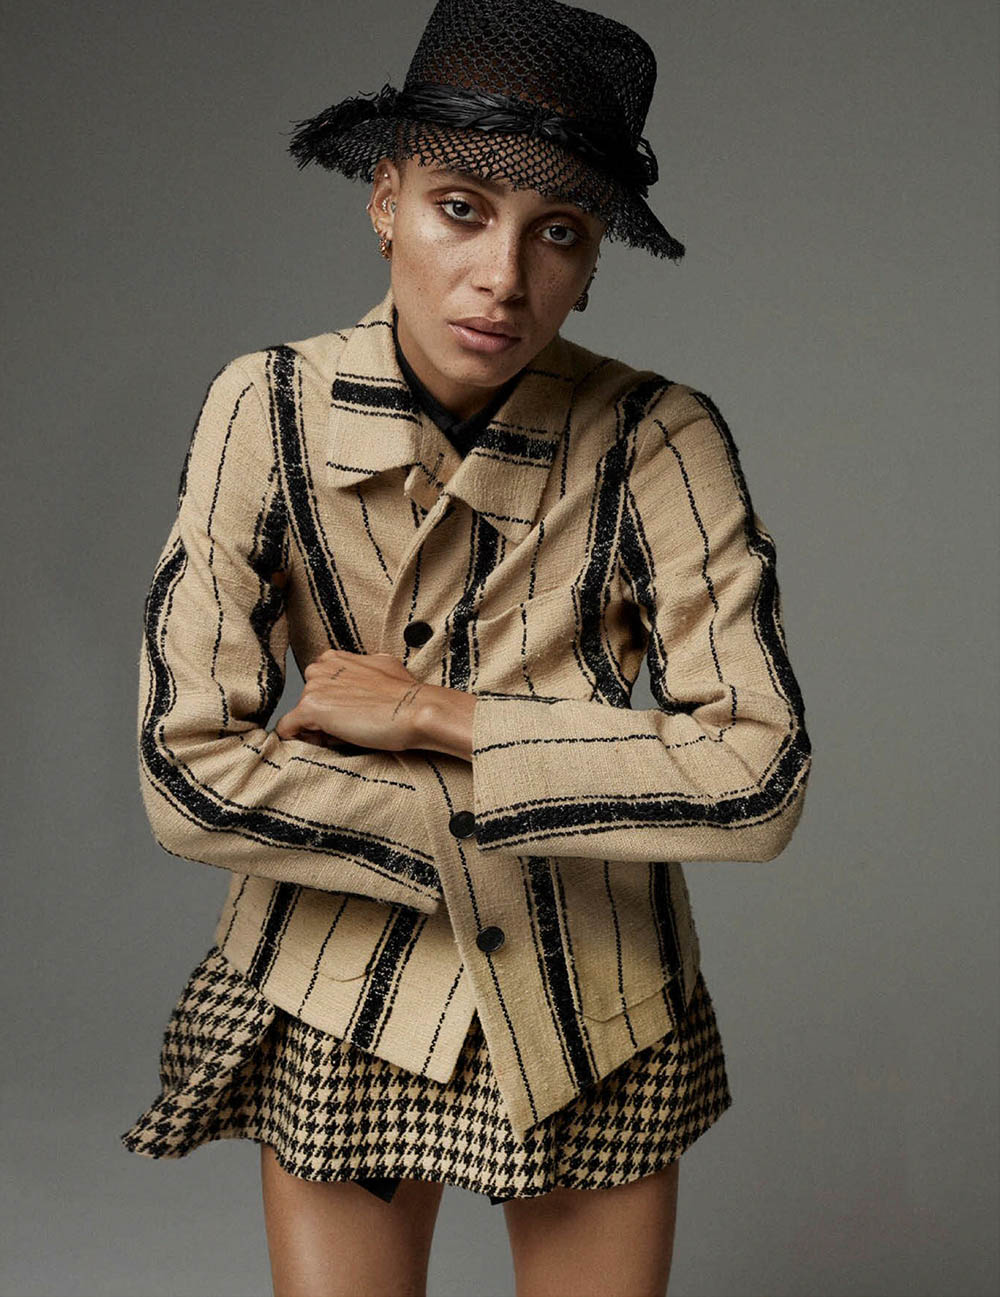 Adwoa Aboah covers Vogue Germany March 2020 by Alique